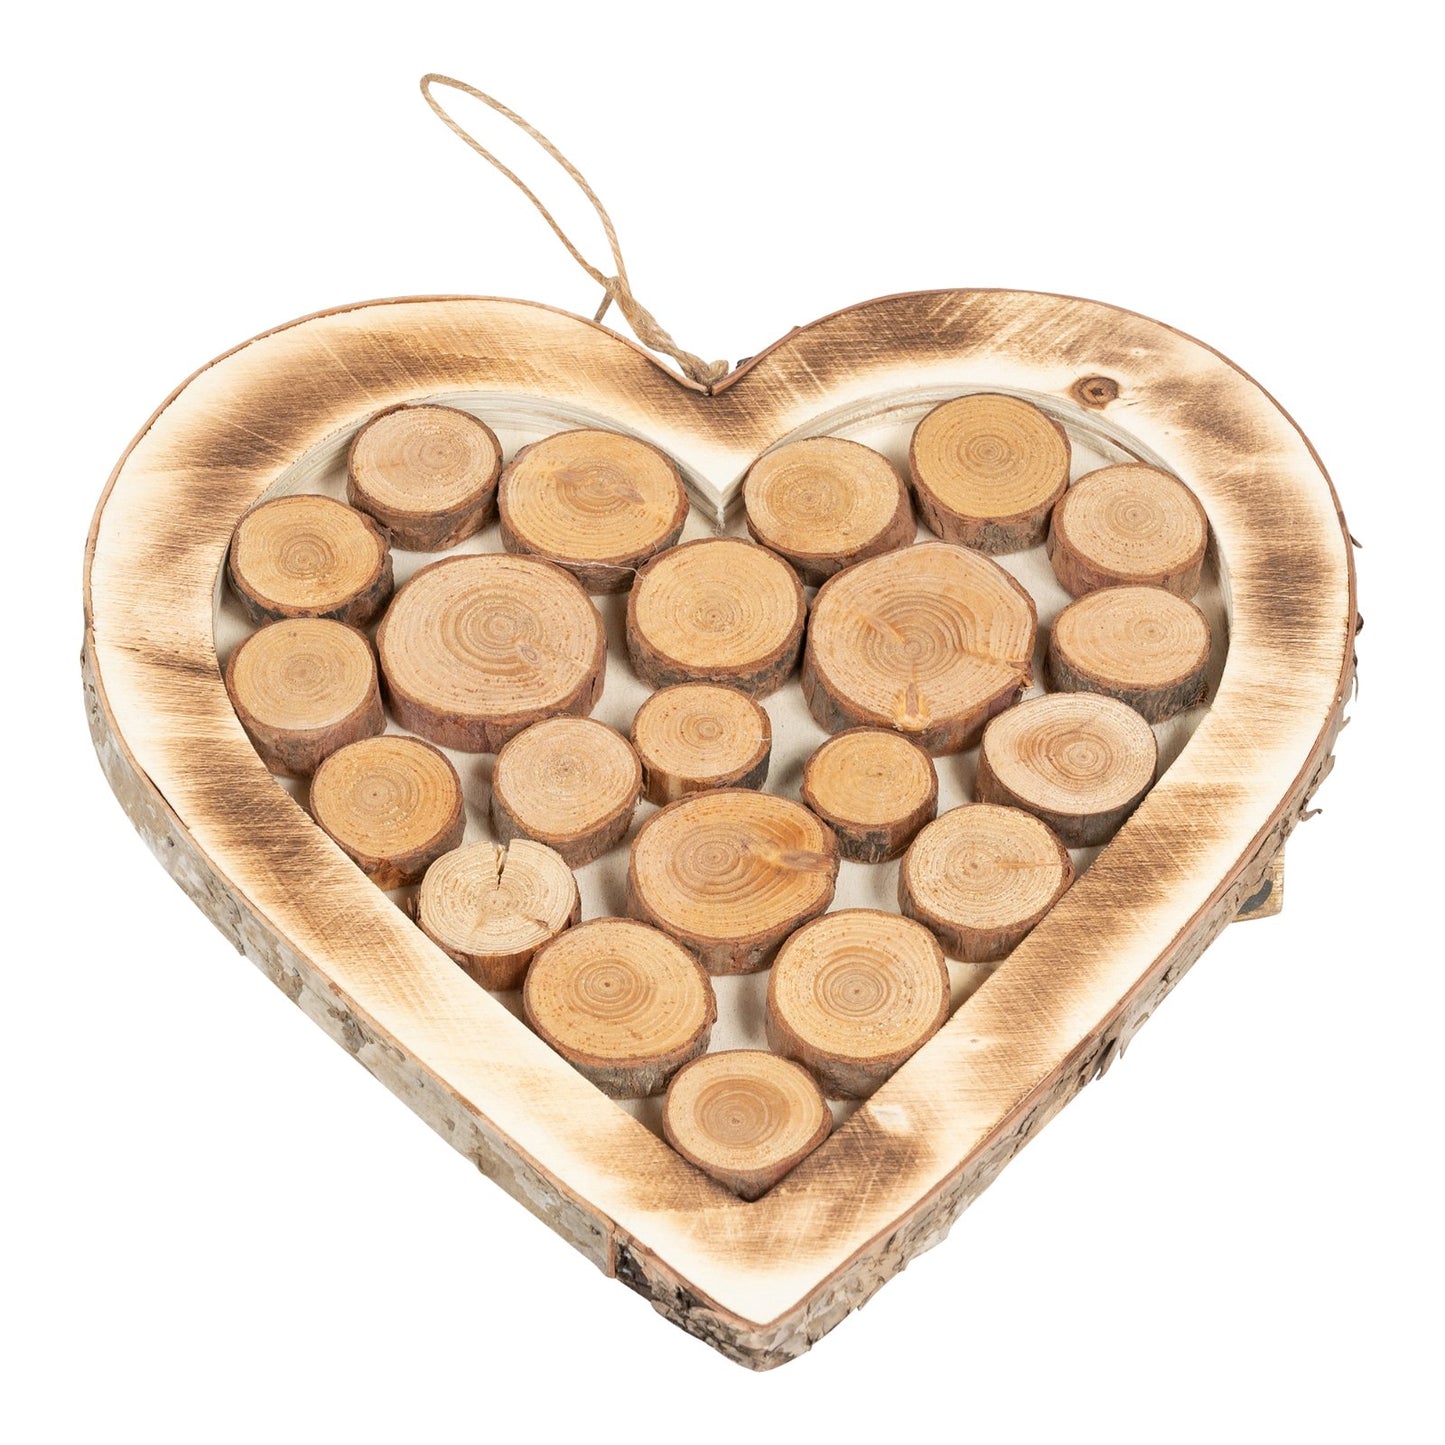 Wooden Hanging Heart With Burnt Effect 28cm